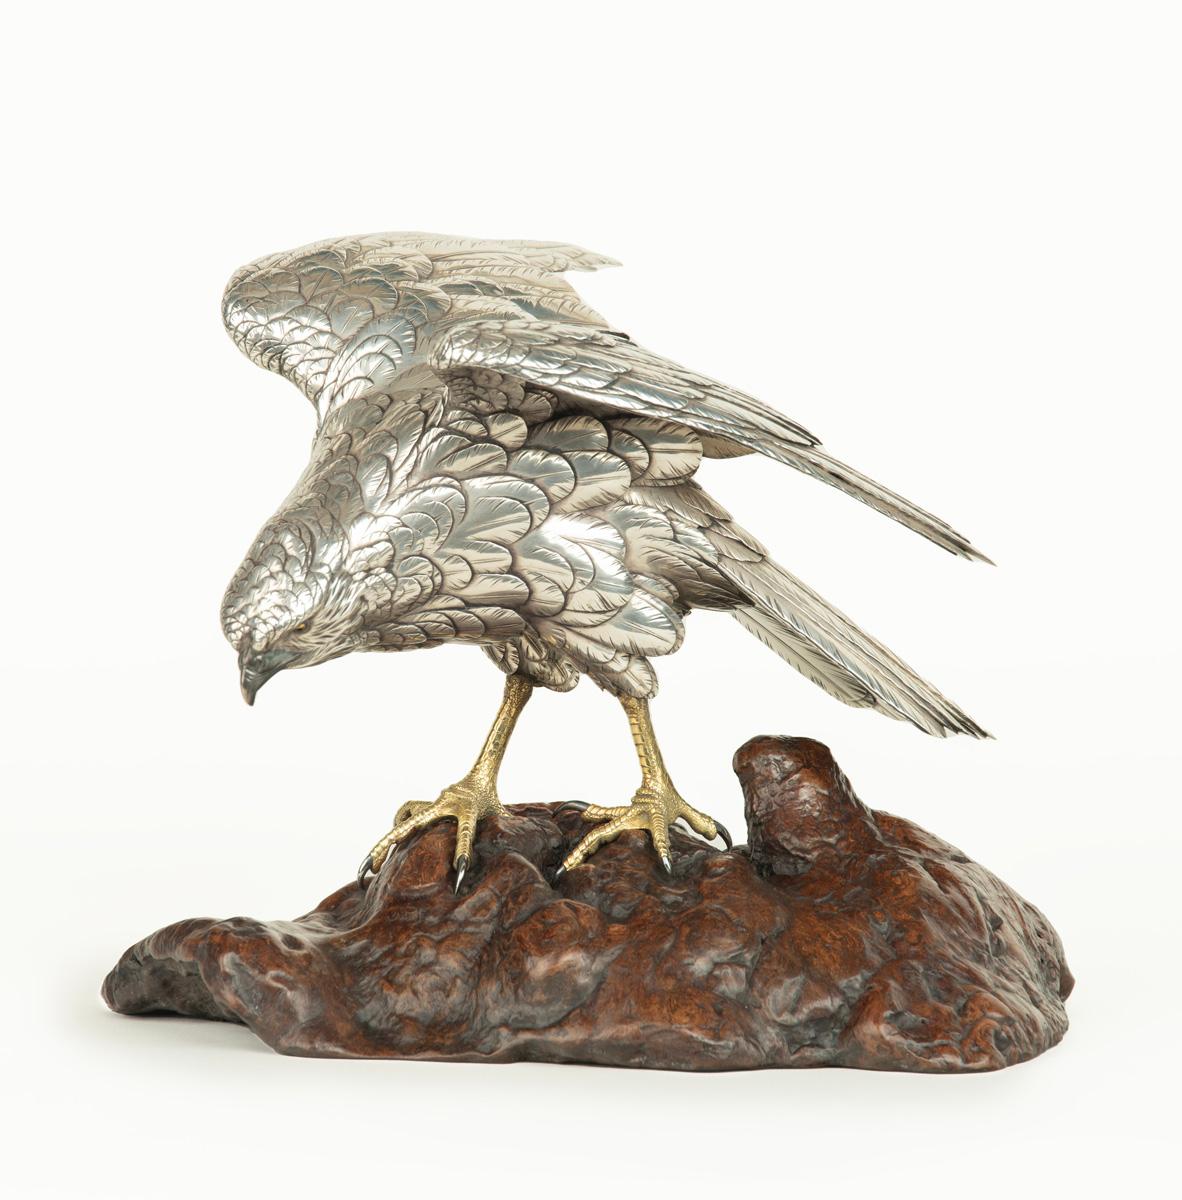 As part of our Japanese works of art collection we are delighted to offer this scarce pure silver Meiji Period (1868-1912) okimono of a hawk, artist signed Juiedo for the famous Musashiya company operated by Ozeki Yahei , on this occasion the artist